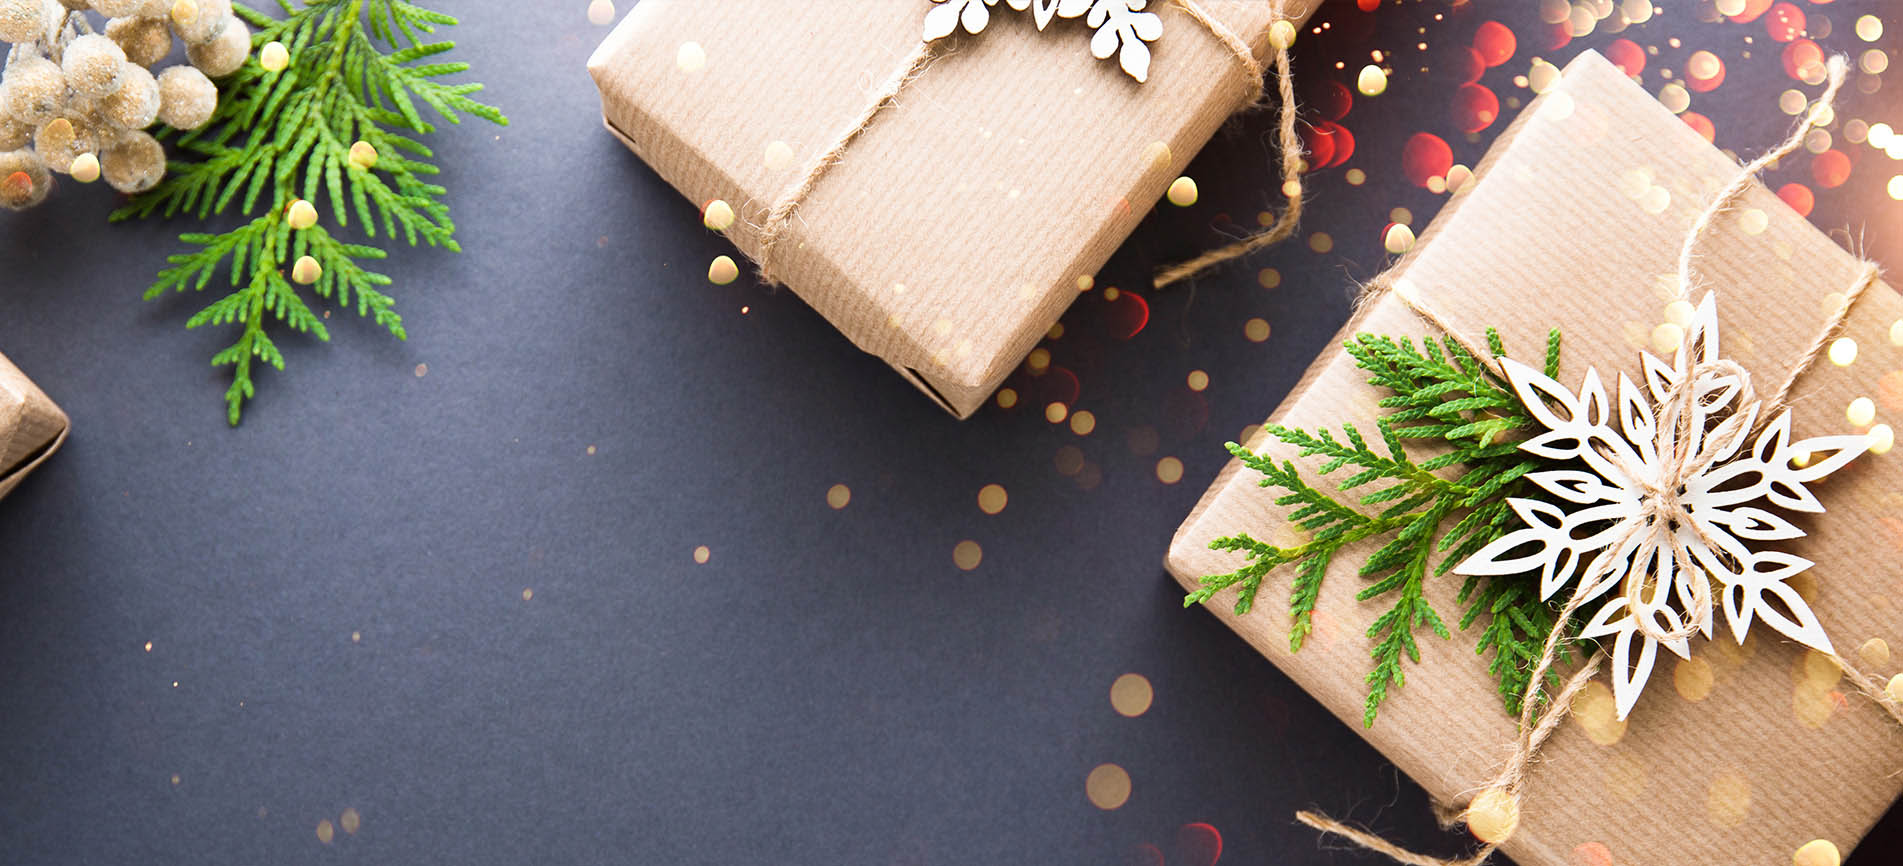 Holiday gifts wrapped in brown paper are pictured against a dark gray background with festive gold and red circles and evergreen branches.